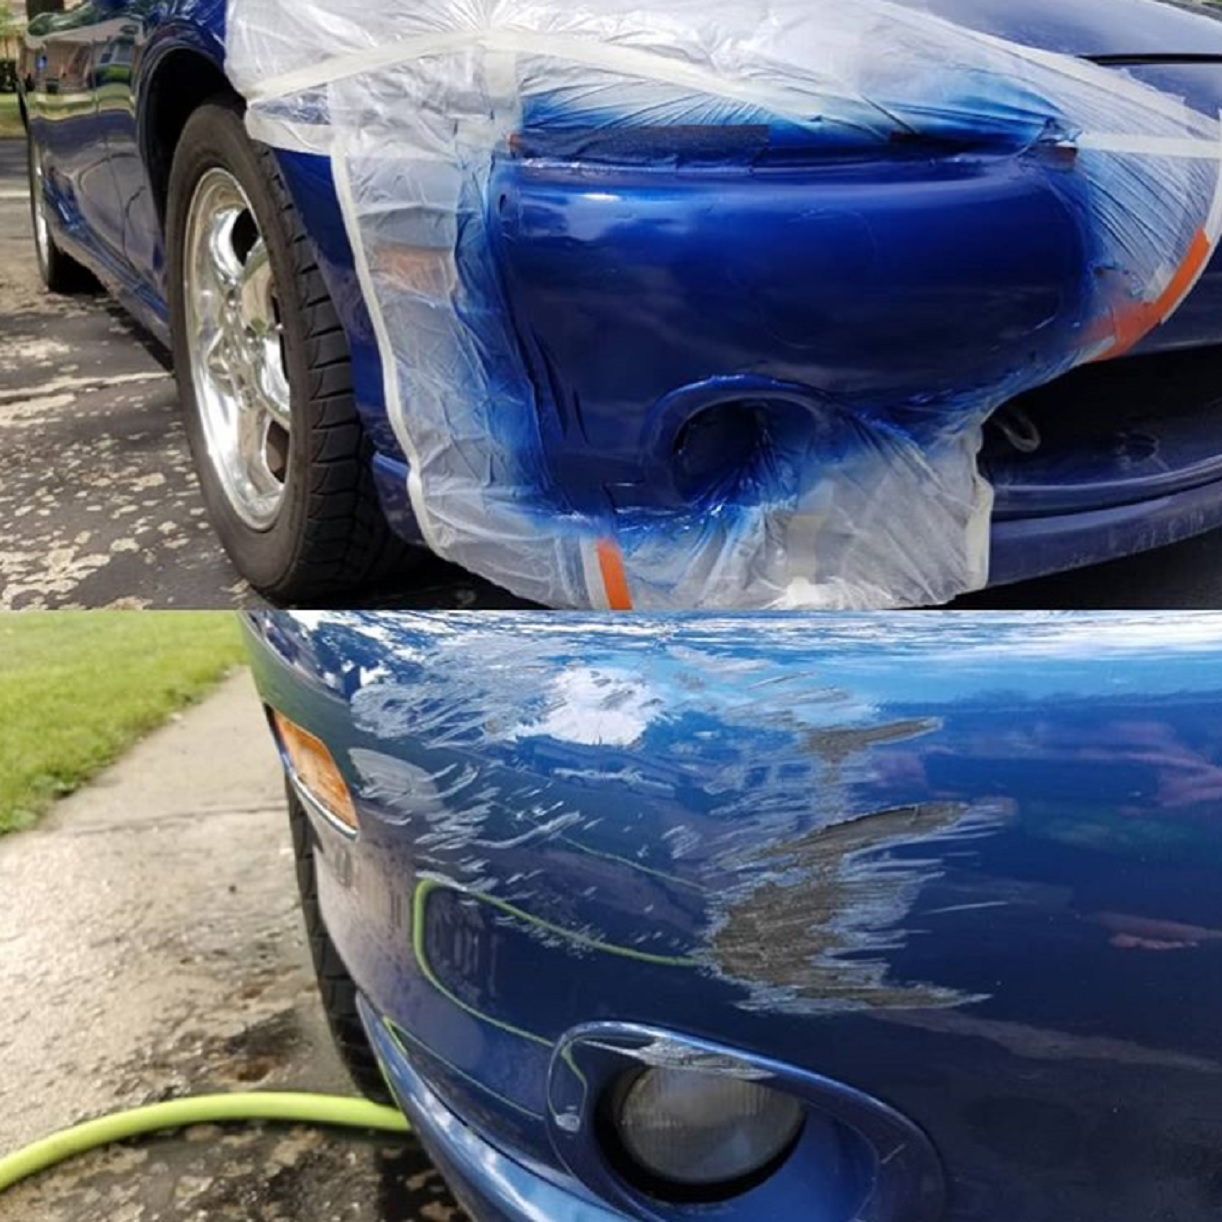 Blue 1999 Mazda Miata shown before and after the car paint and scratched bumper were repaired